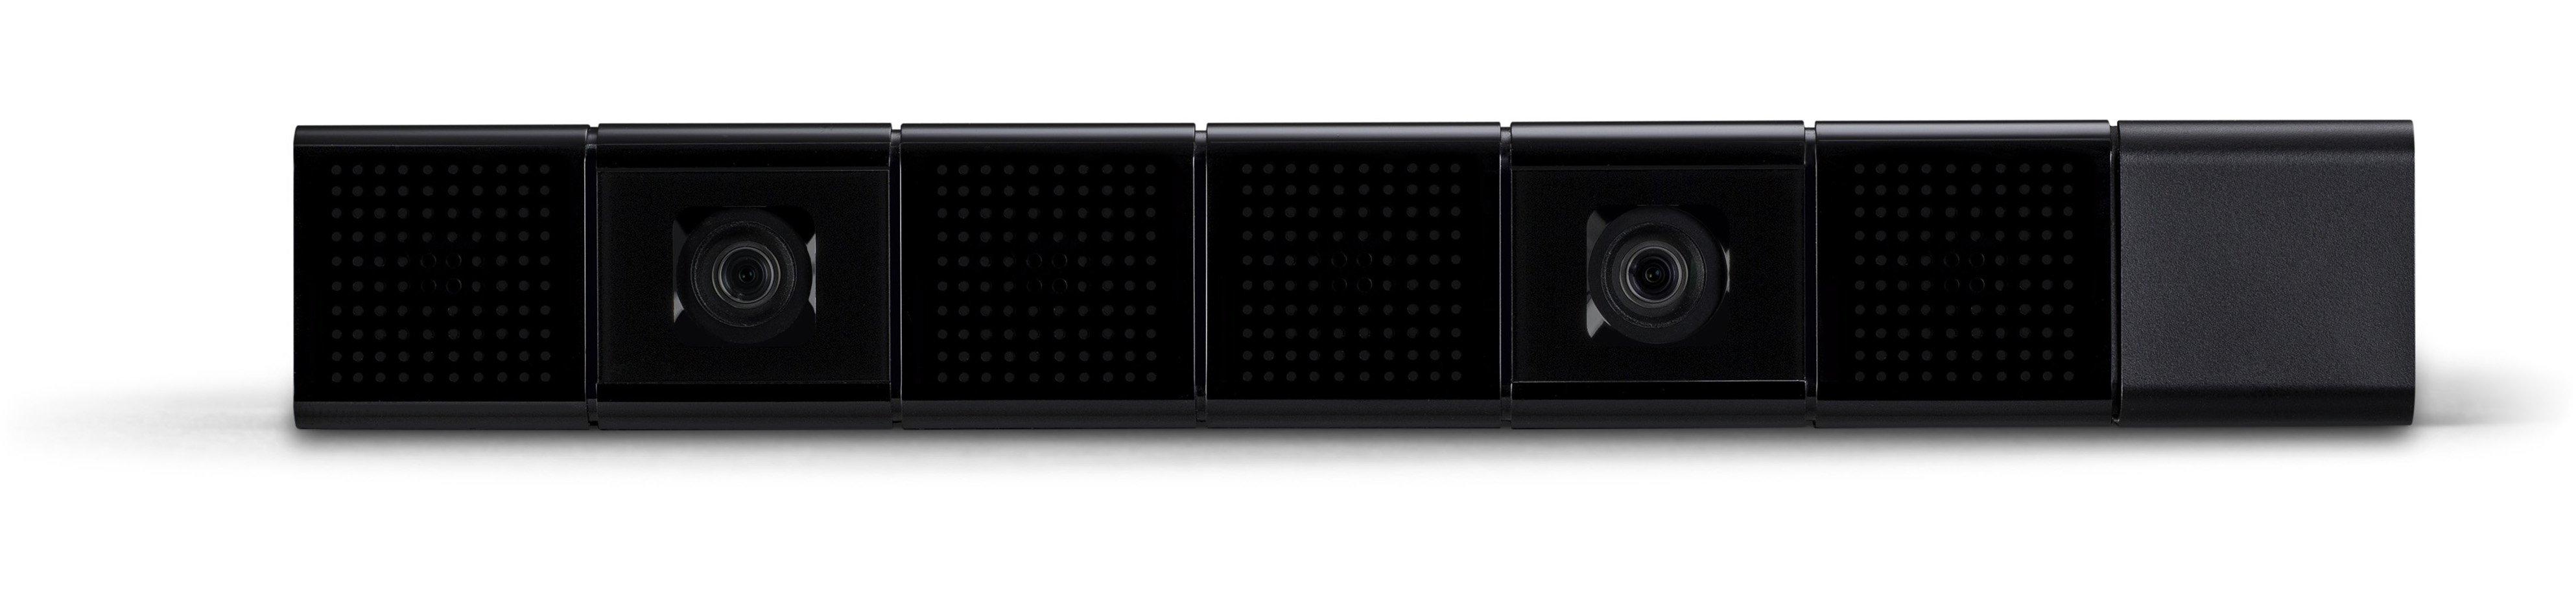 Antipoison scaring Nægte Sony PlayStation Camera for PlayStation 4 (Previous Model) | GameStop